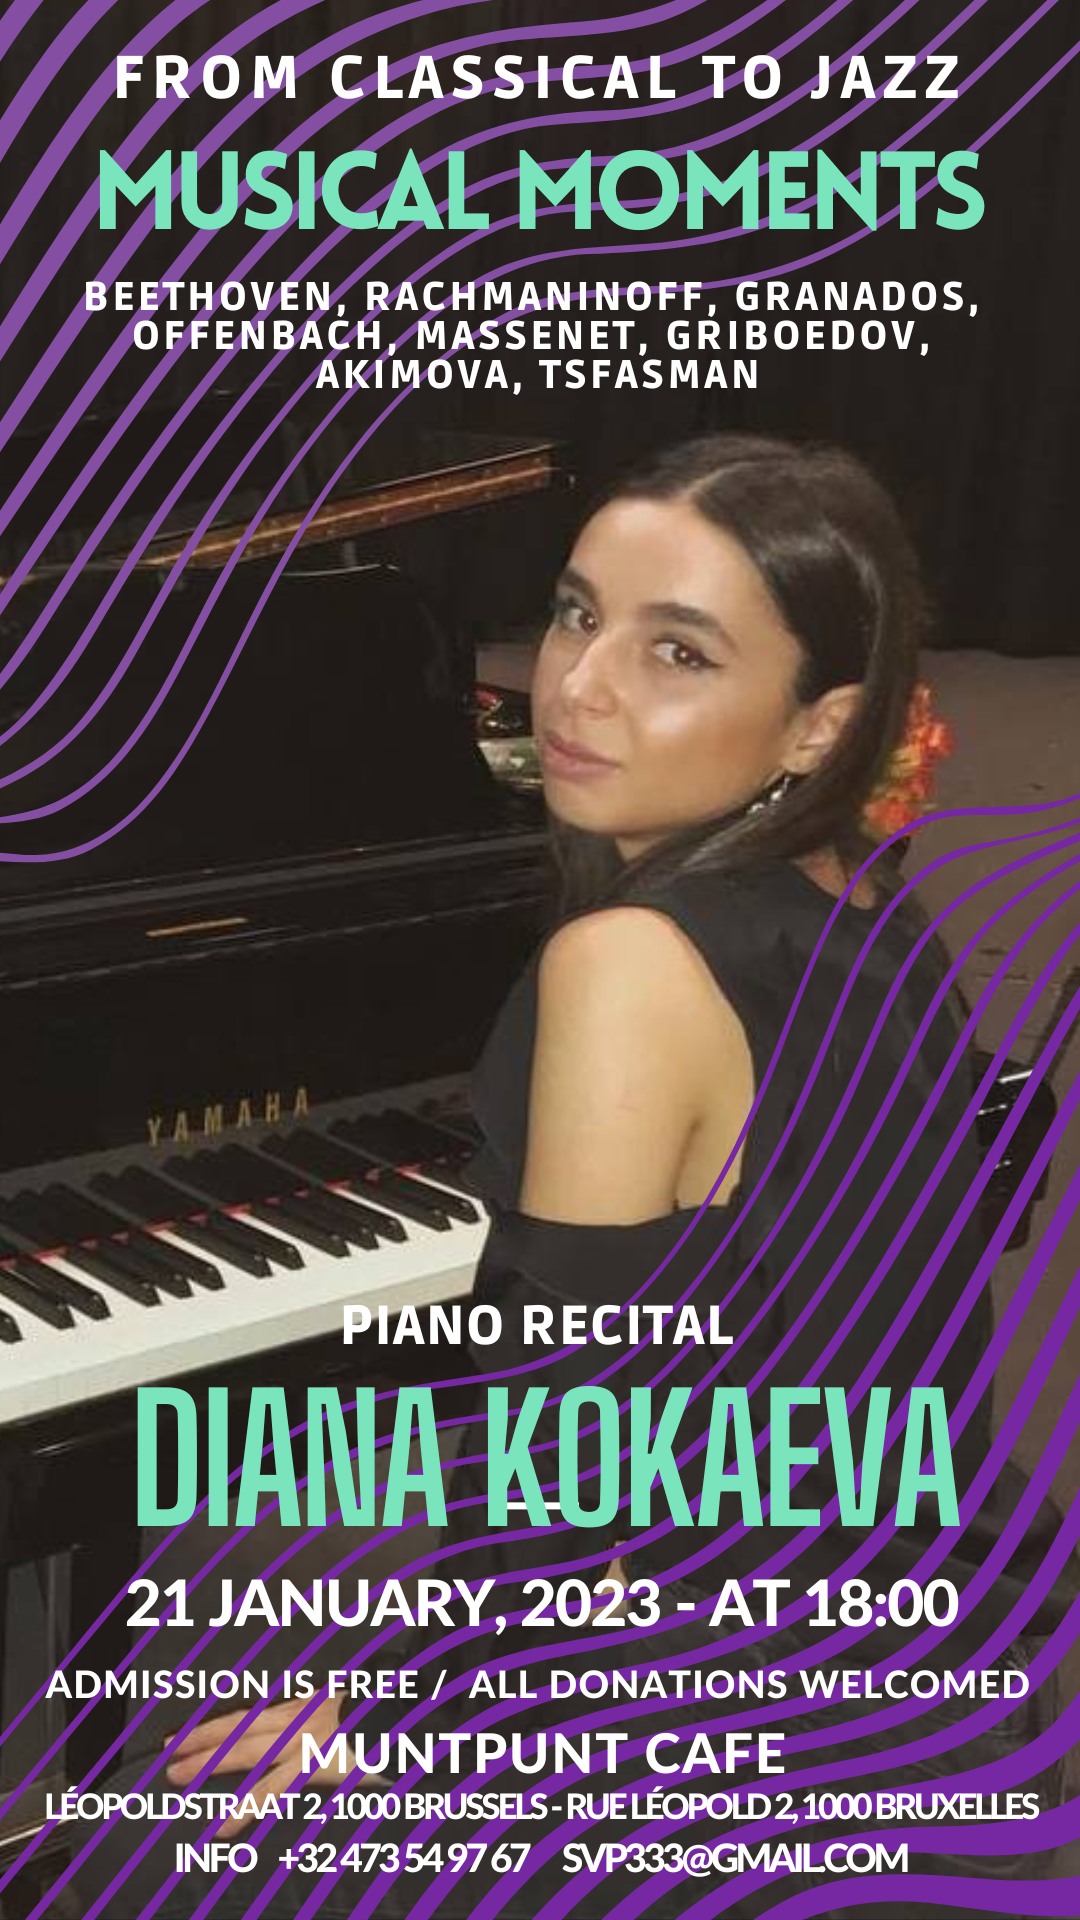 Affiche. ICEP Musical Moments (from classical to jazz). Piano récital Diana Kokaeva. 2023-01-21